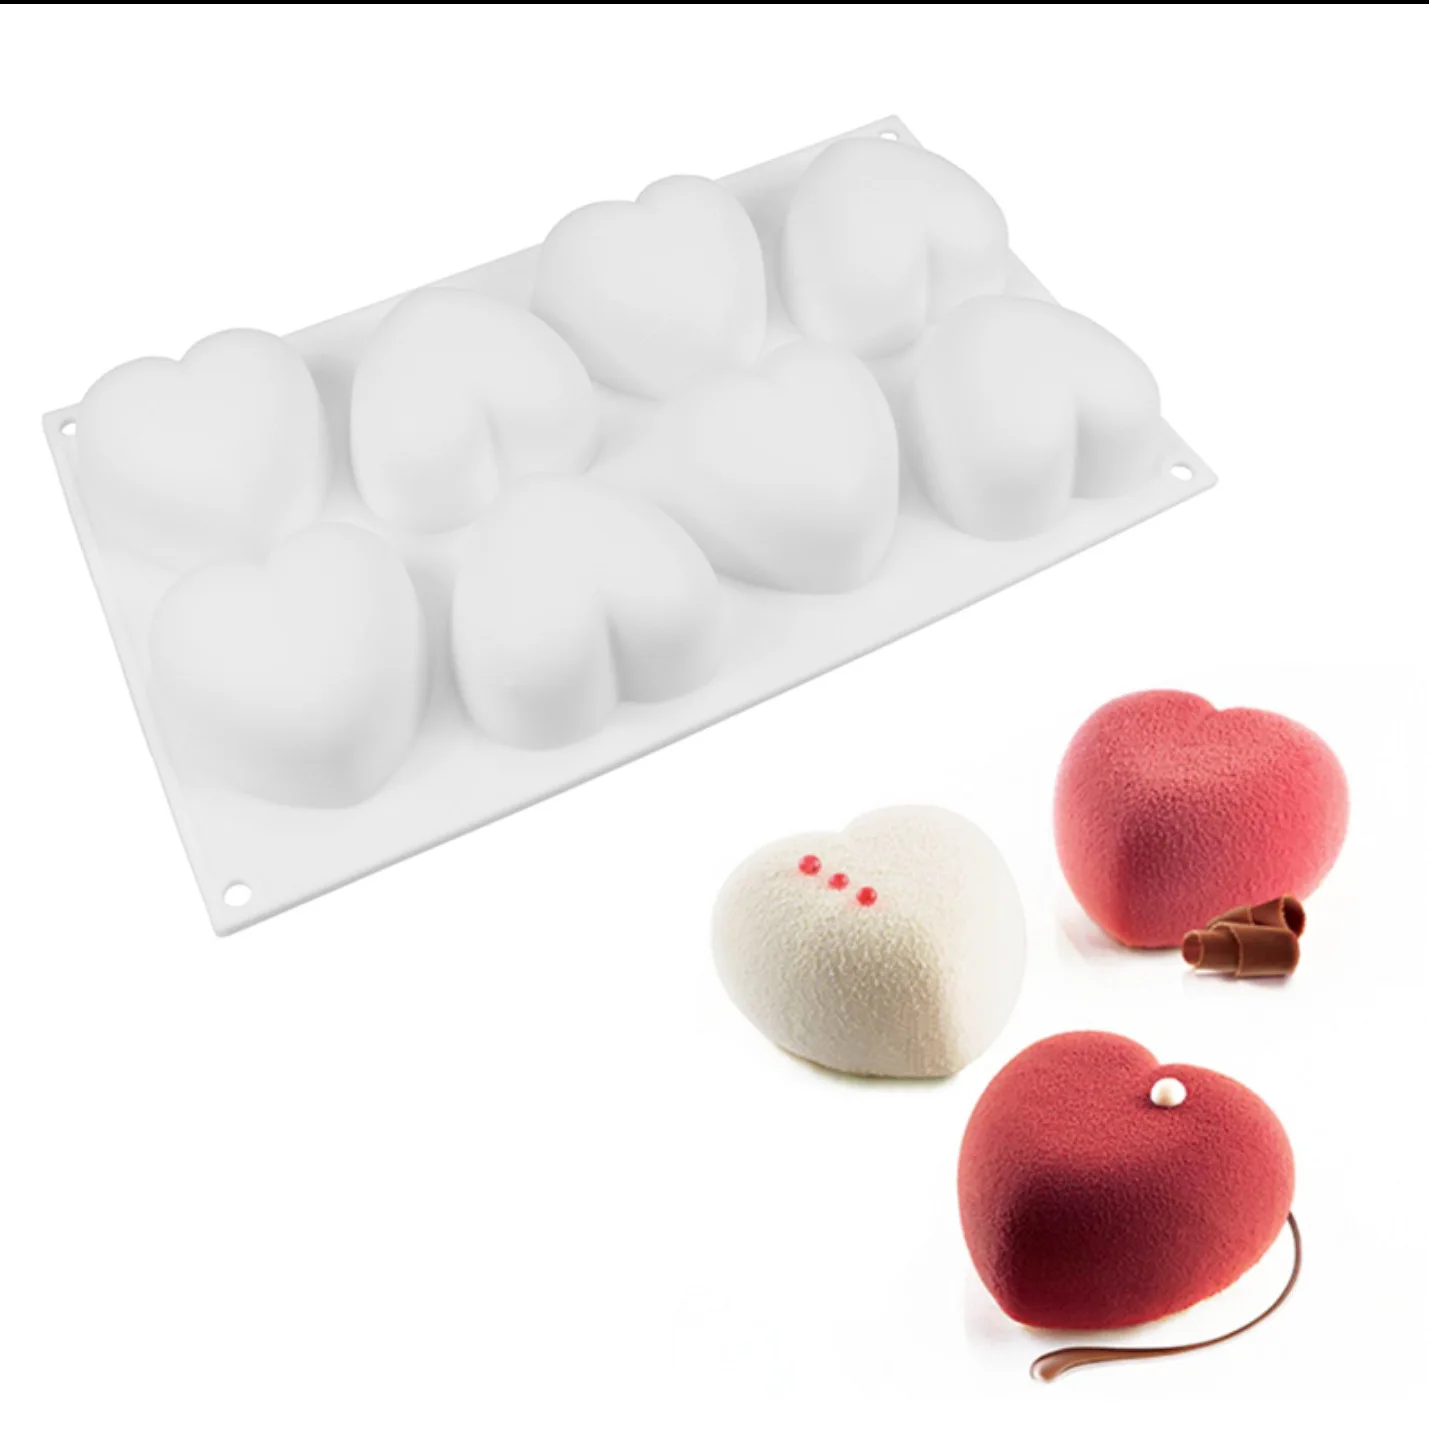 

8-Cavity Lovely Heart-Shaped Silicone Molds for Sponge Cakes Mousse Chocolate Dessert Bakeware Pastry Mould Wholesale DropShip